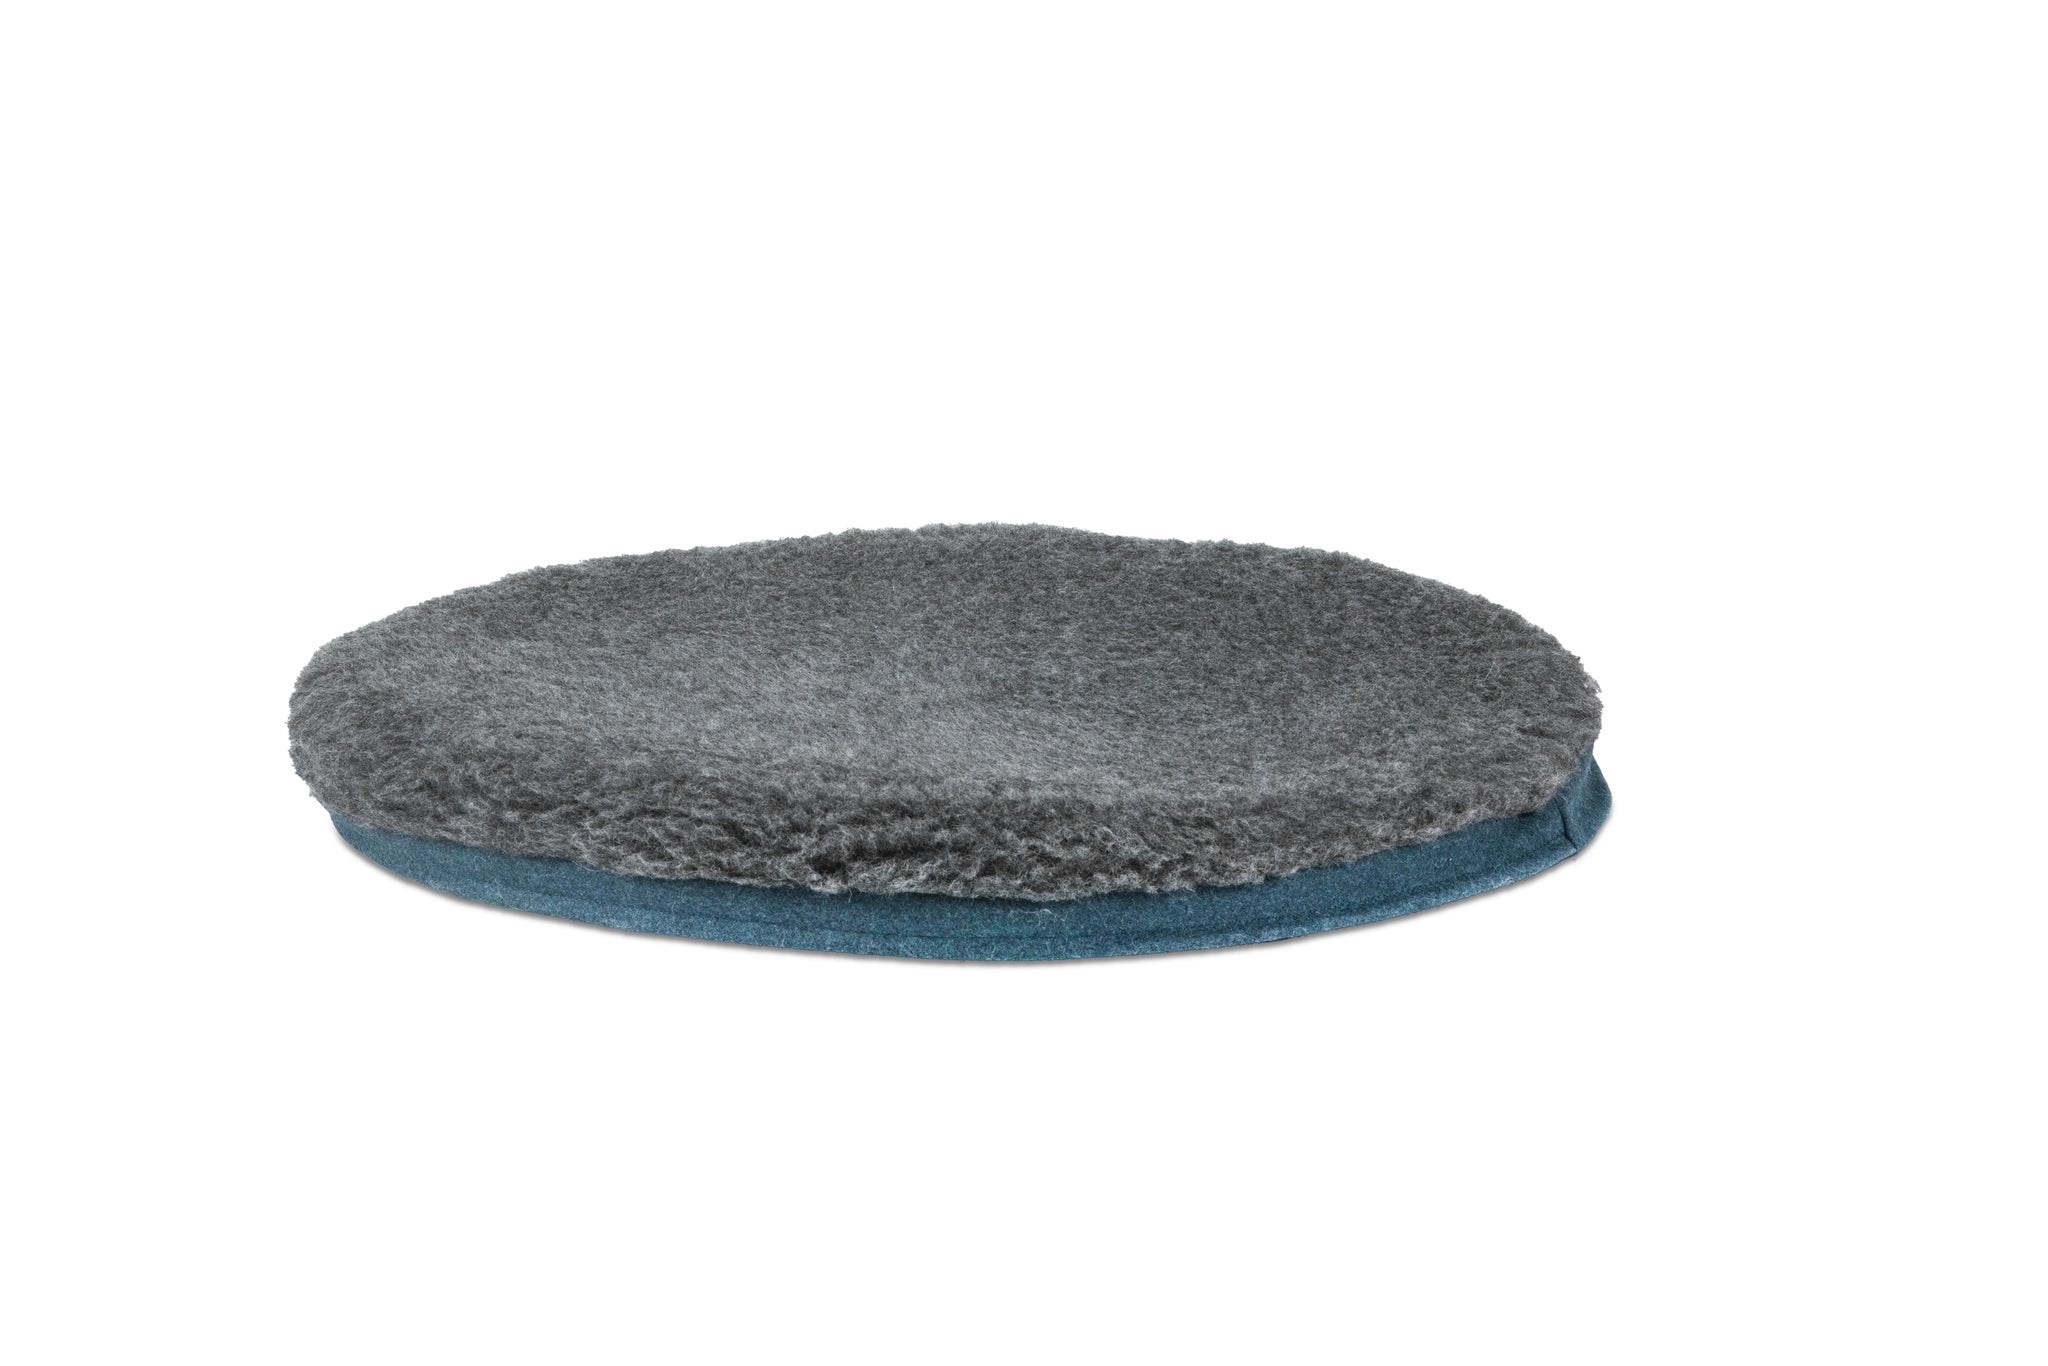 Cerulean Blue Oval Dog Bed Mattress Cover